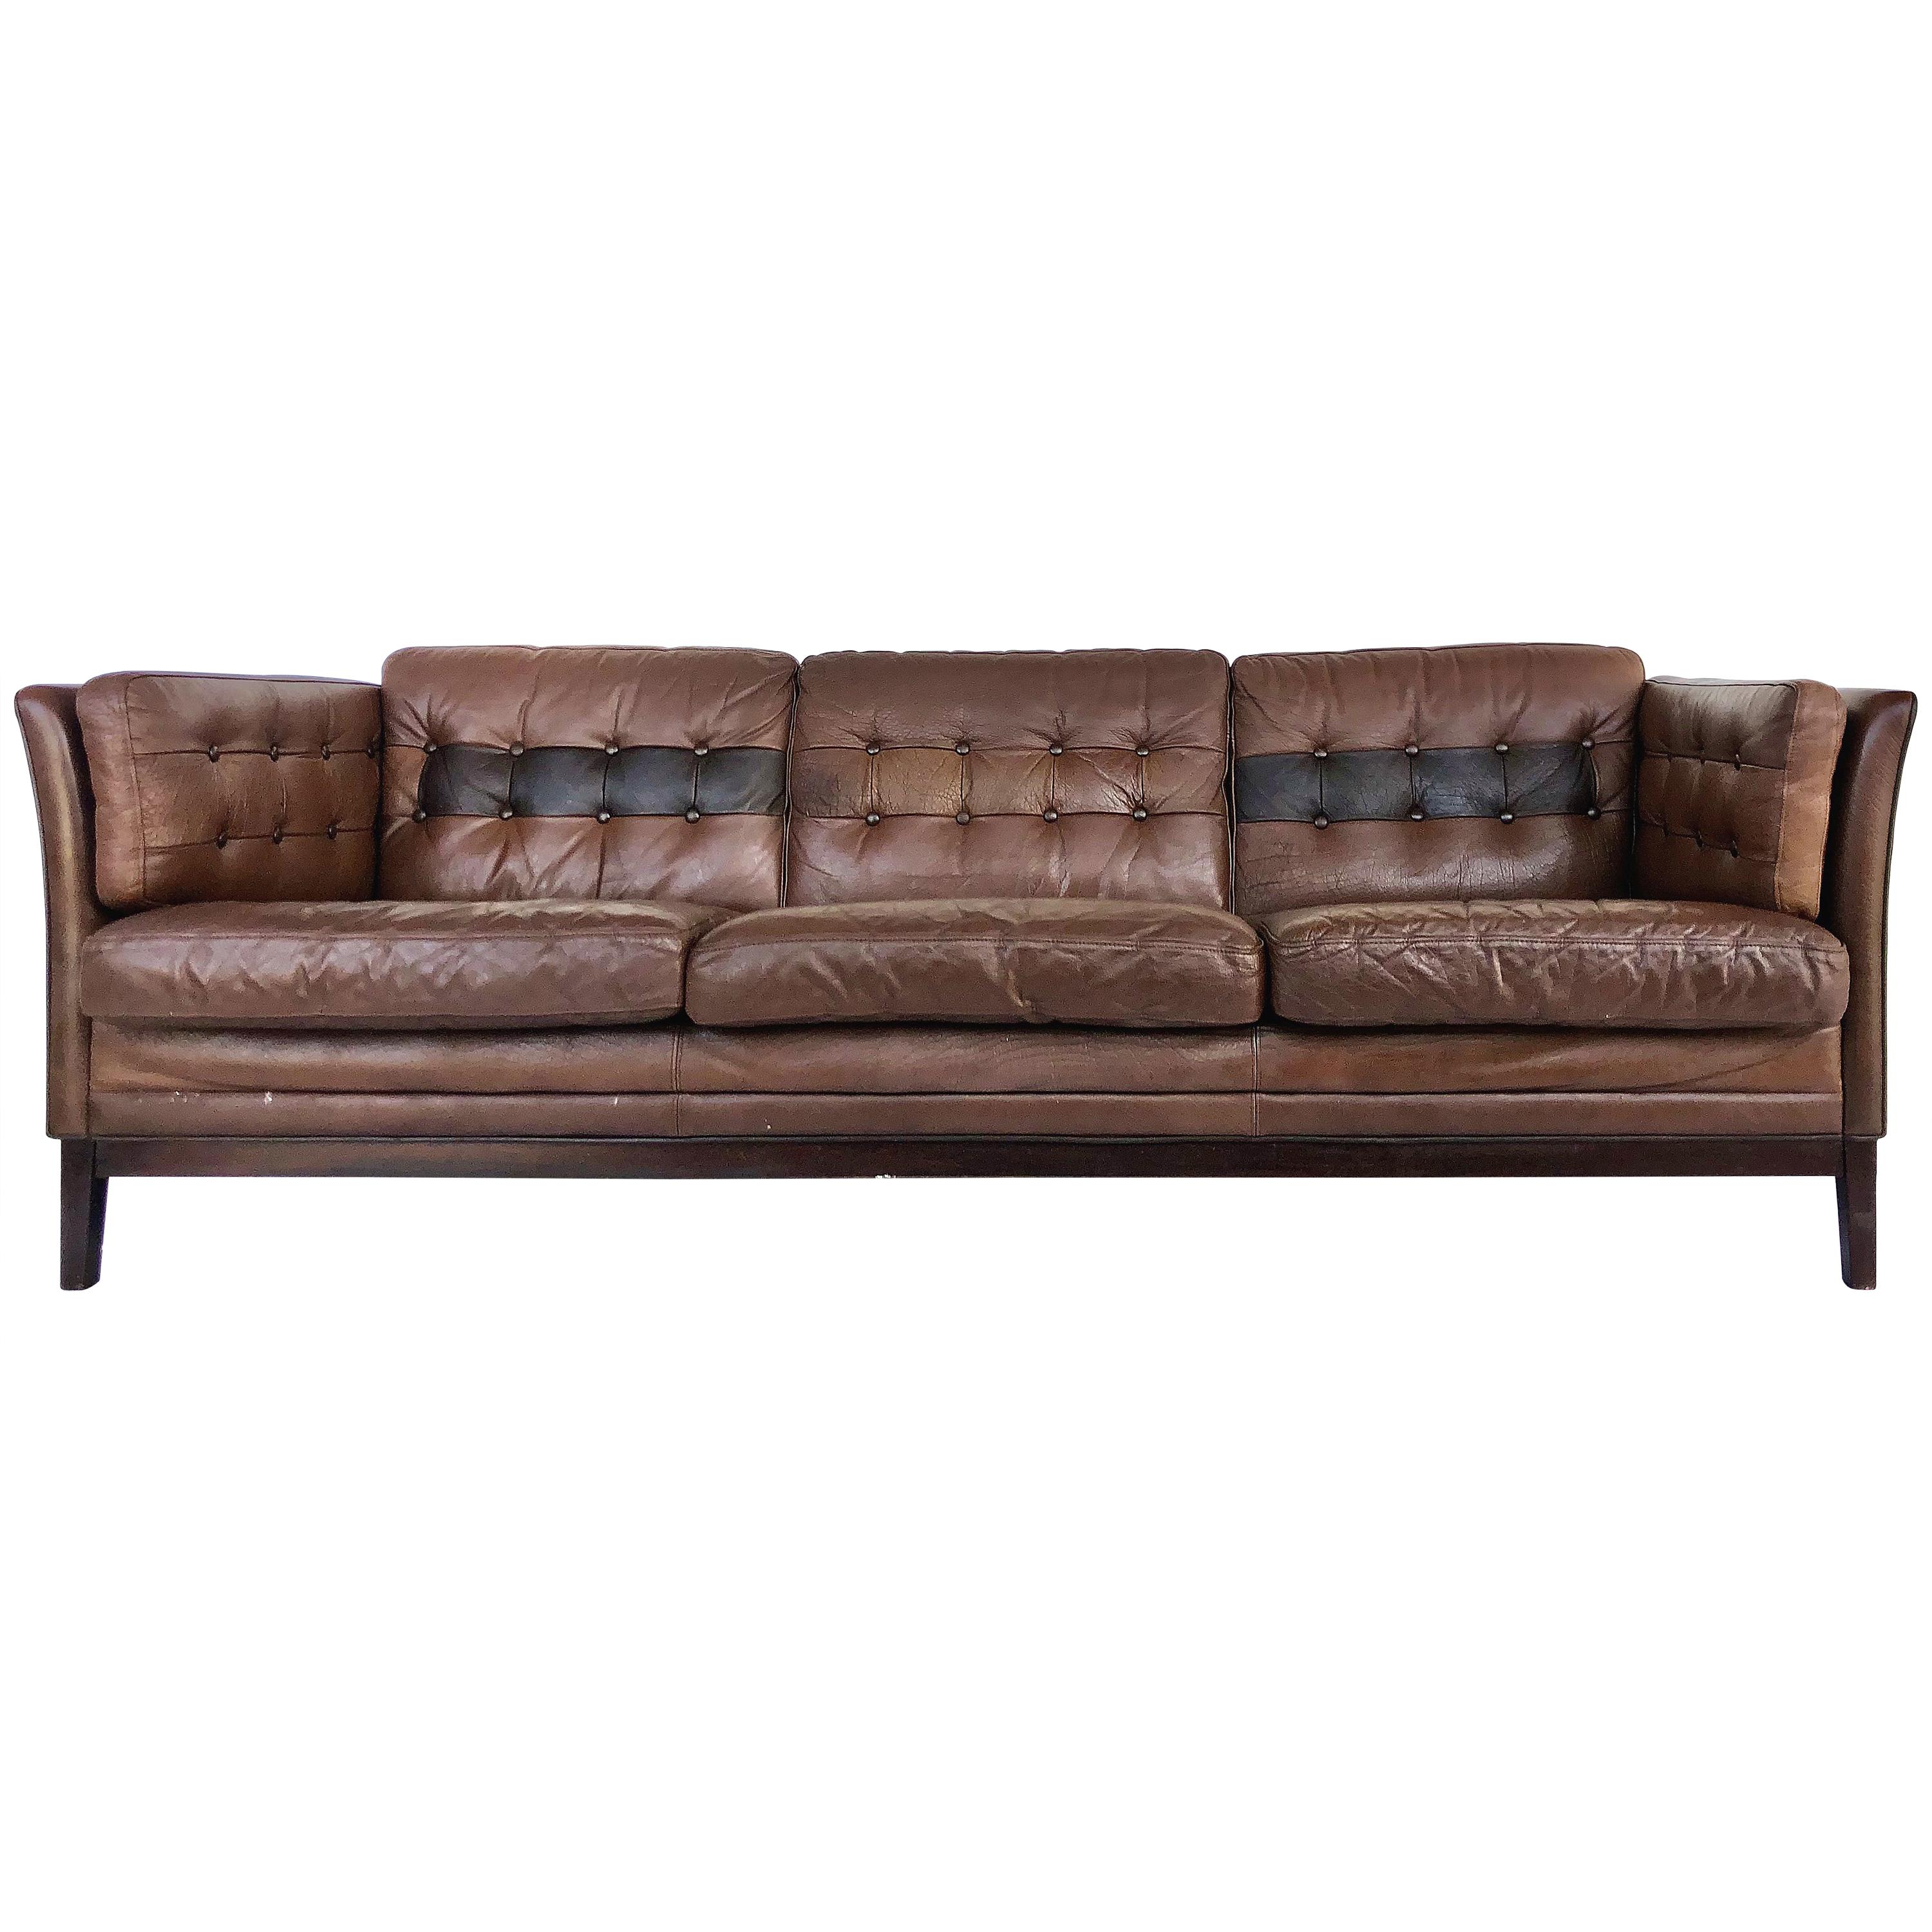 1970s Danish Modern Leather and Rosewood Sofa